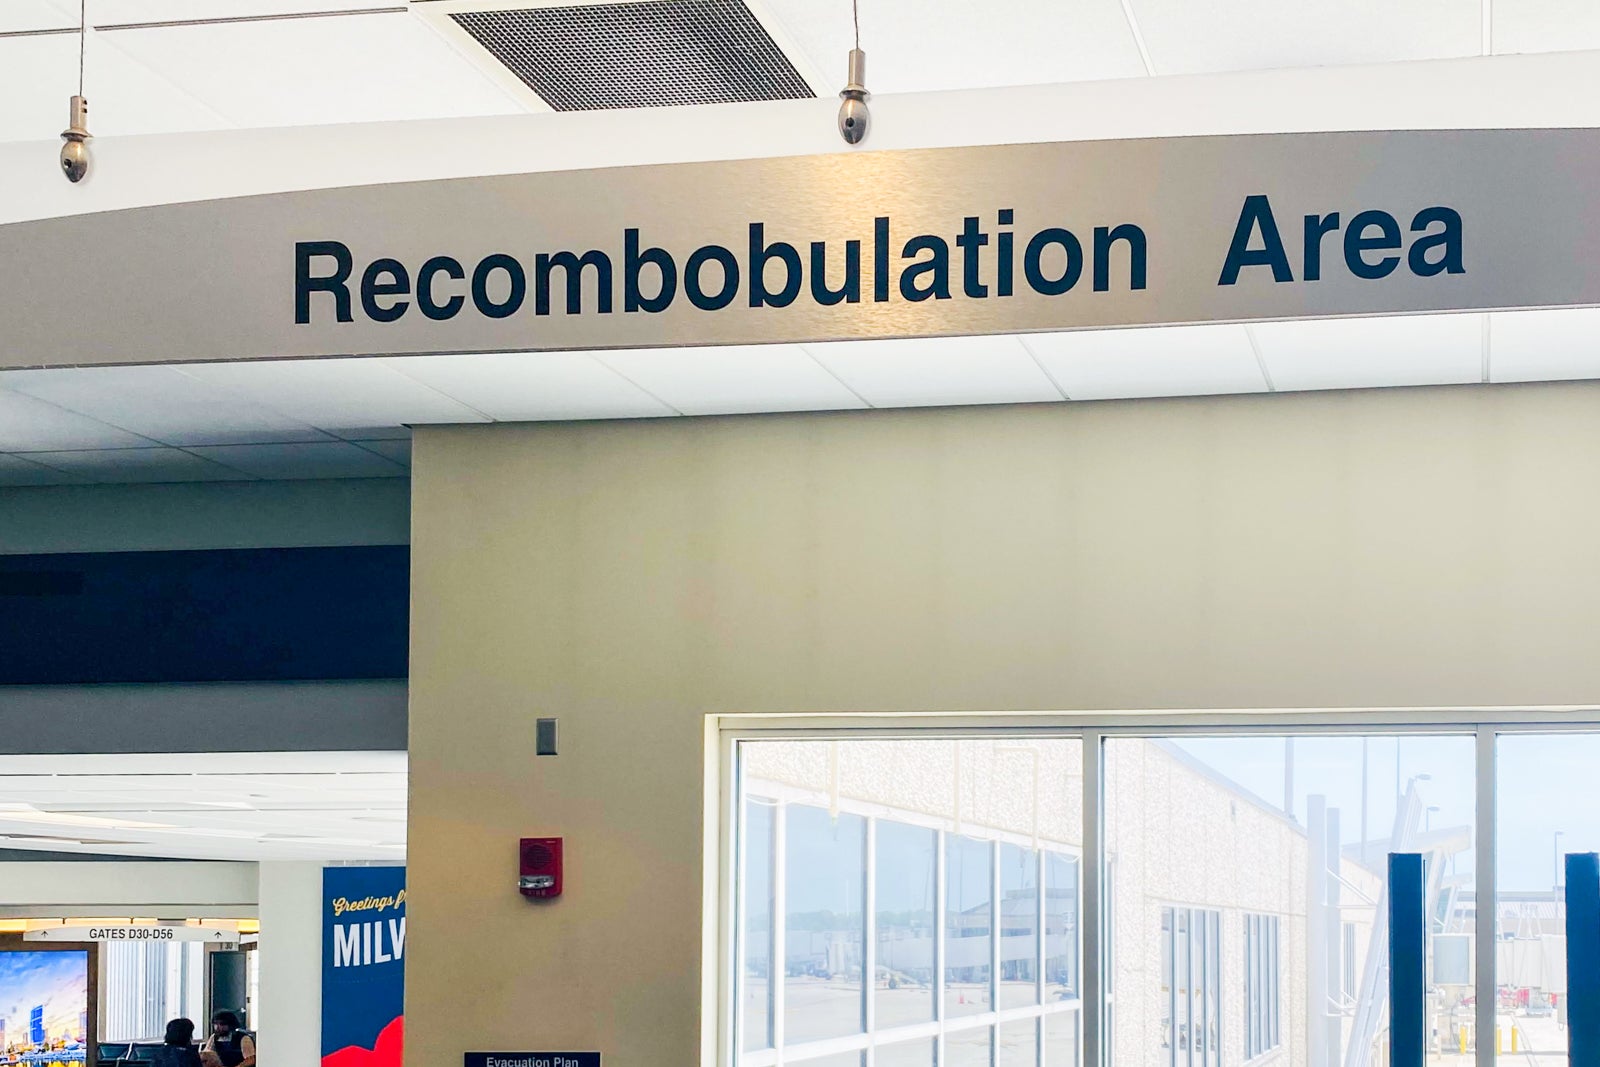 sign for recombobulation area